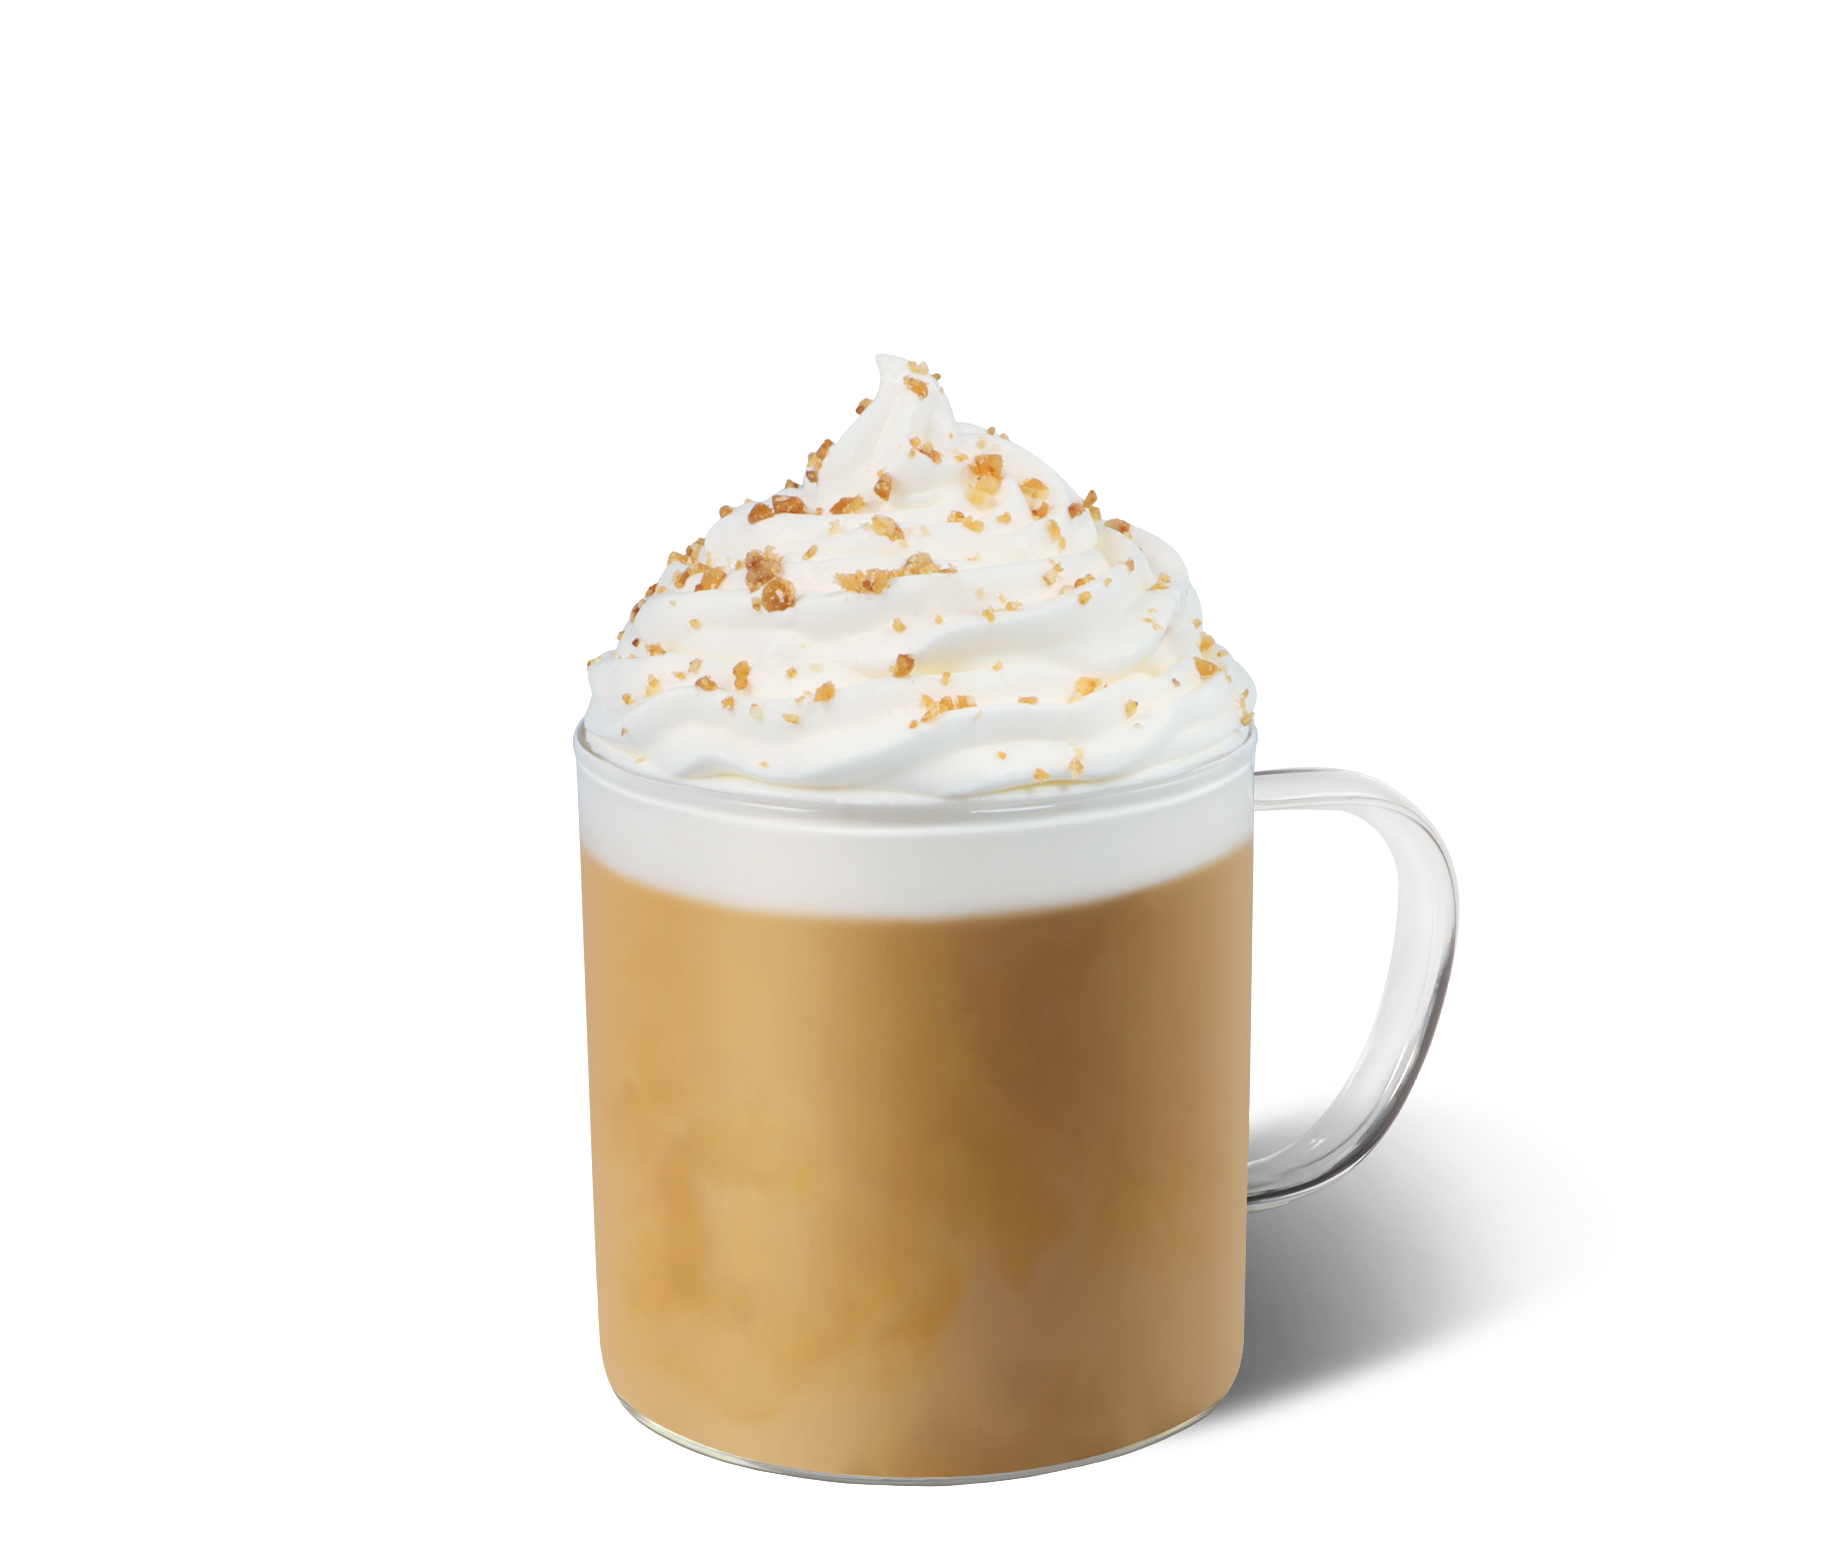 Toffee Nut Latte Recipe  Starbucks® Coffee At Home